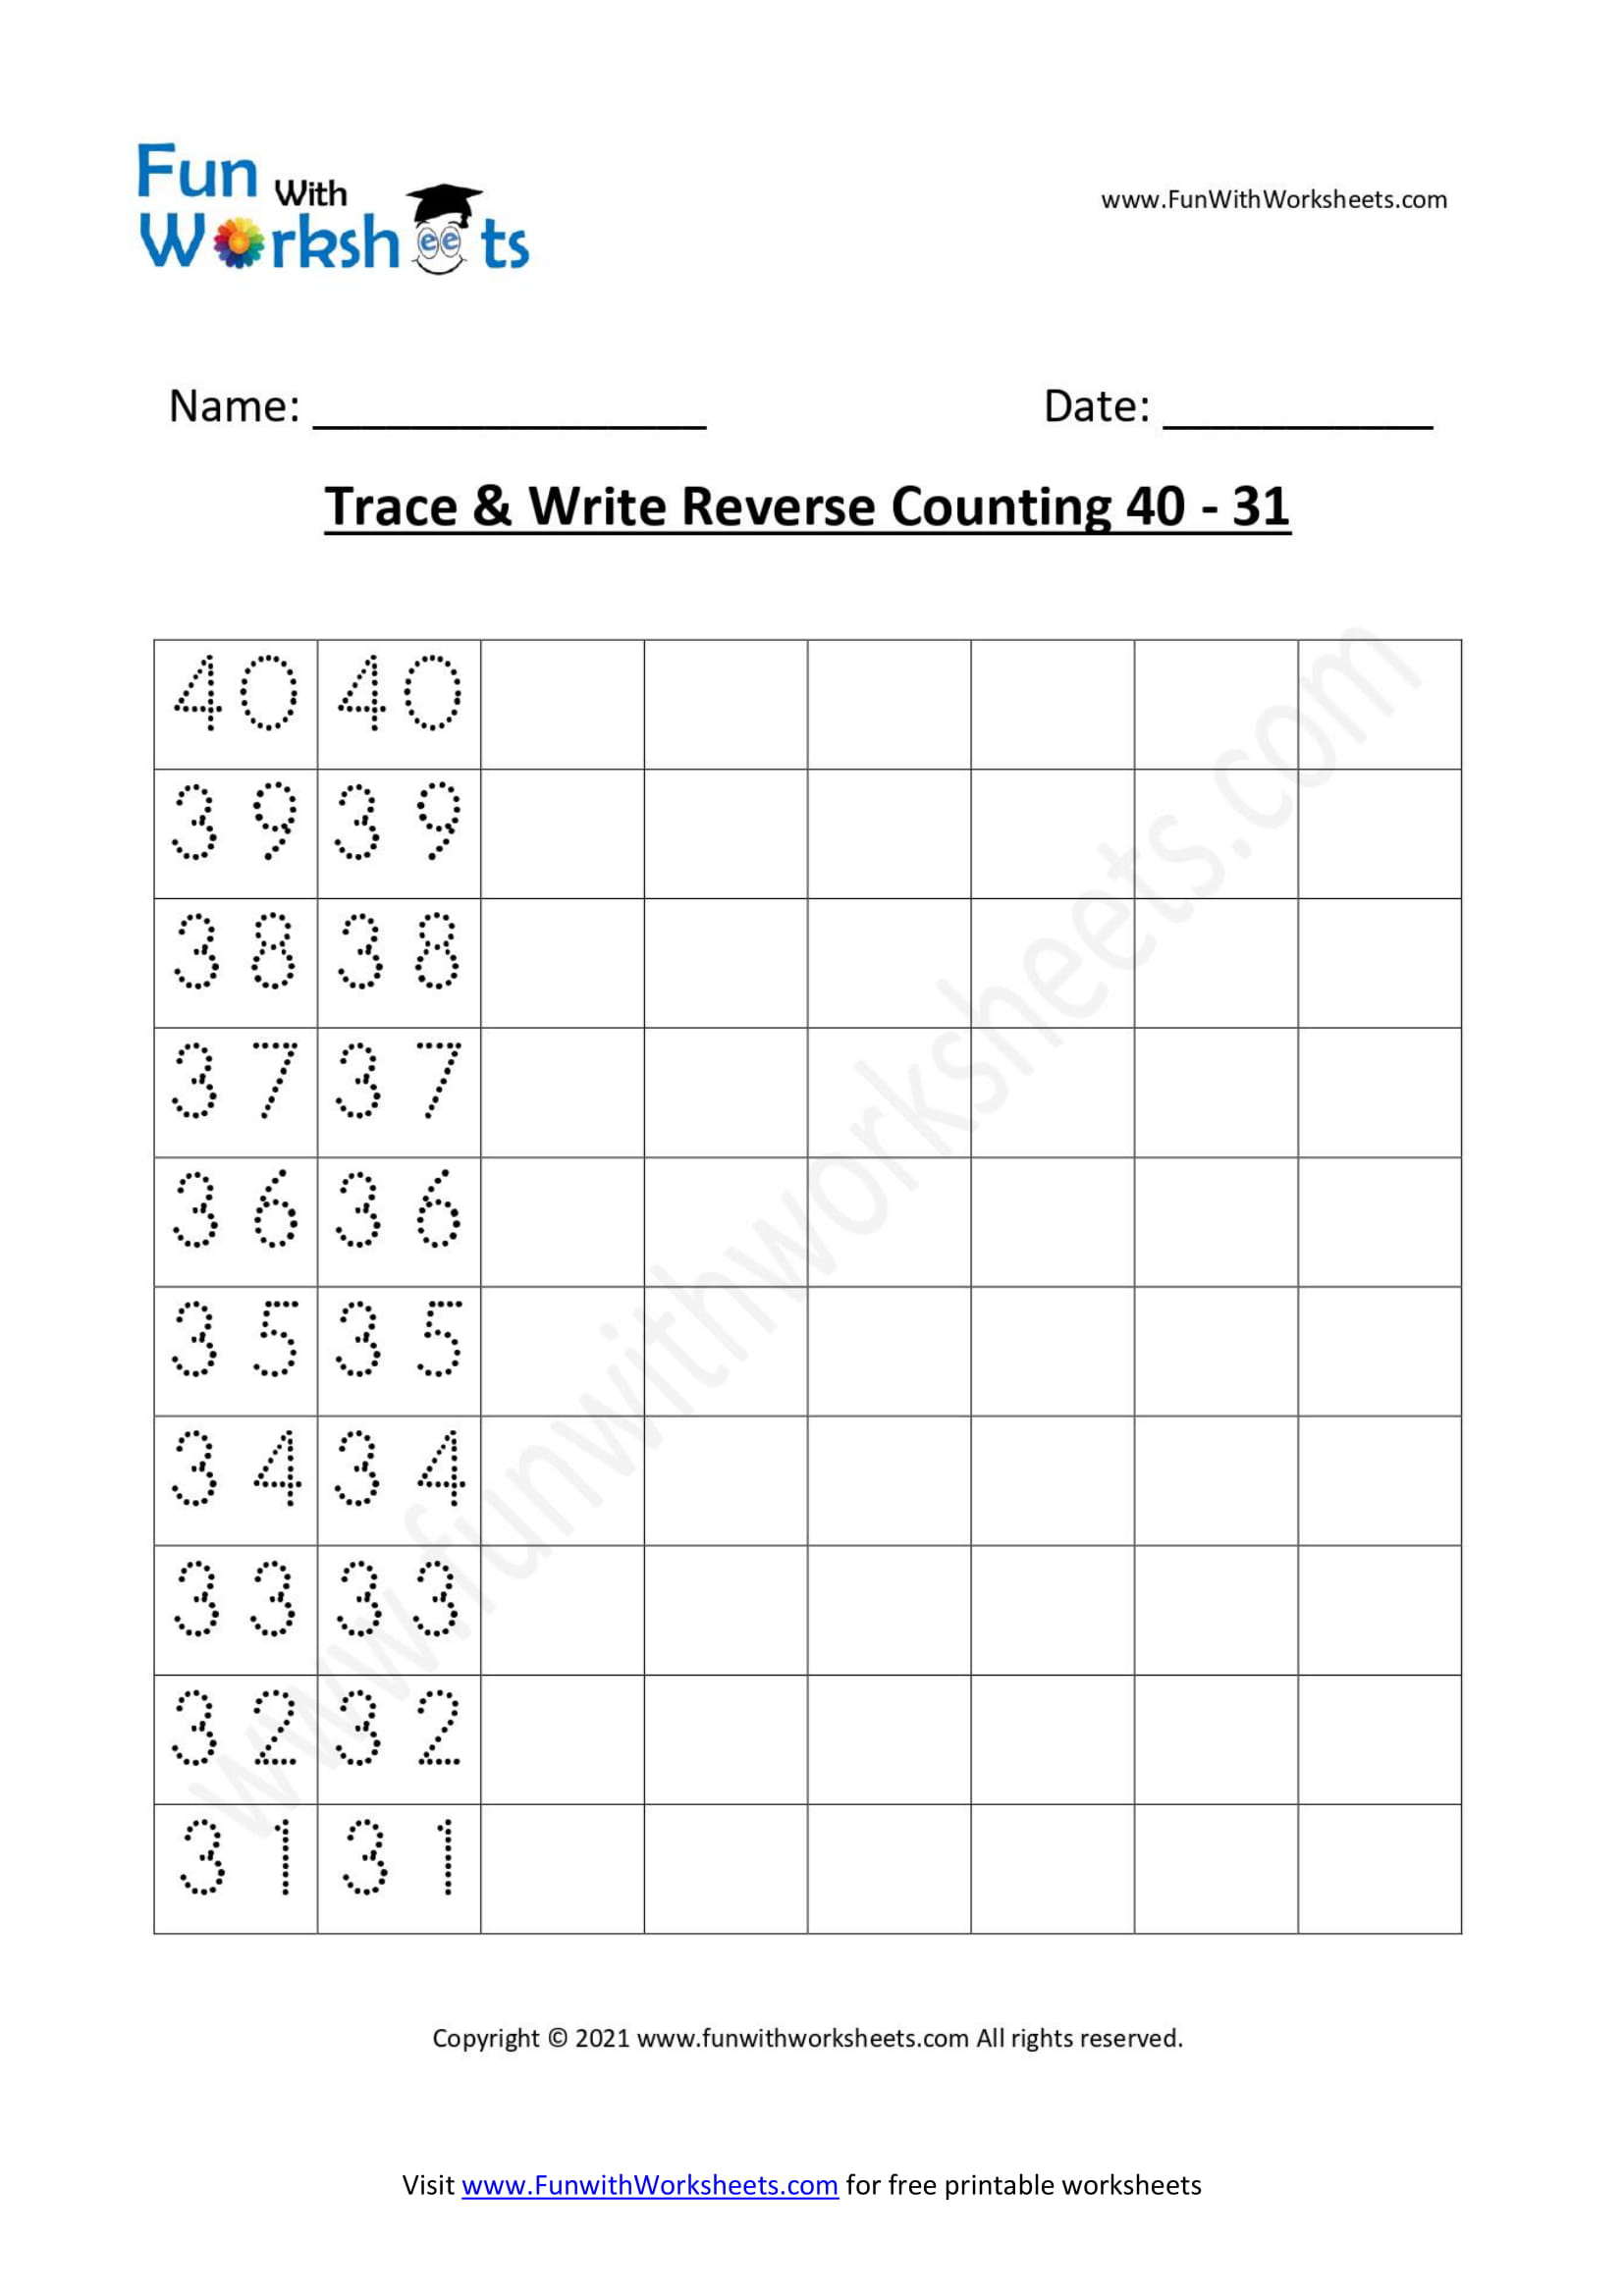 trace-and-learn-reverse-counting-40-31-funwithworksheets